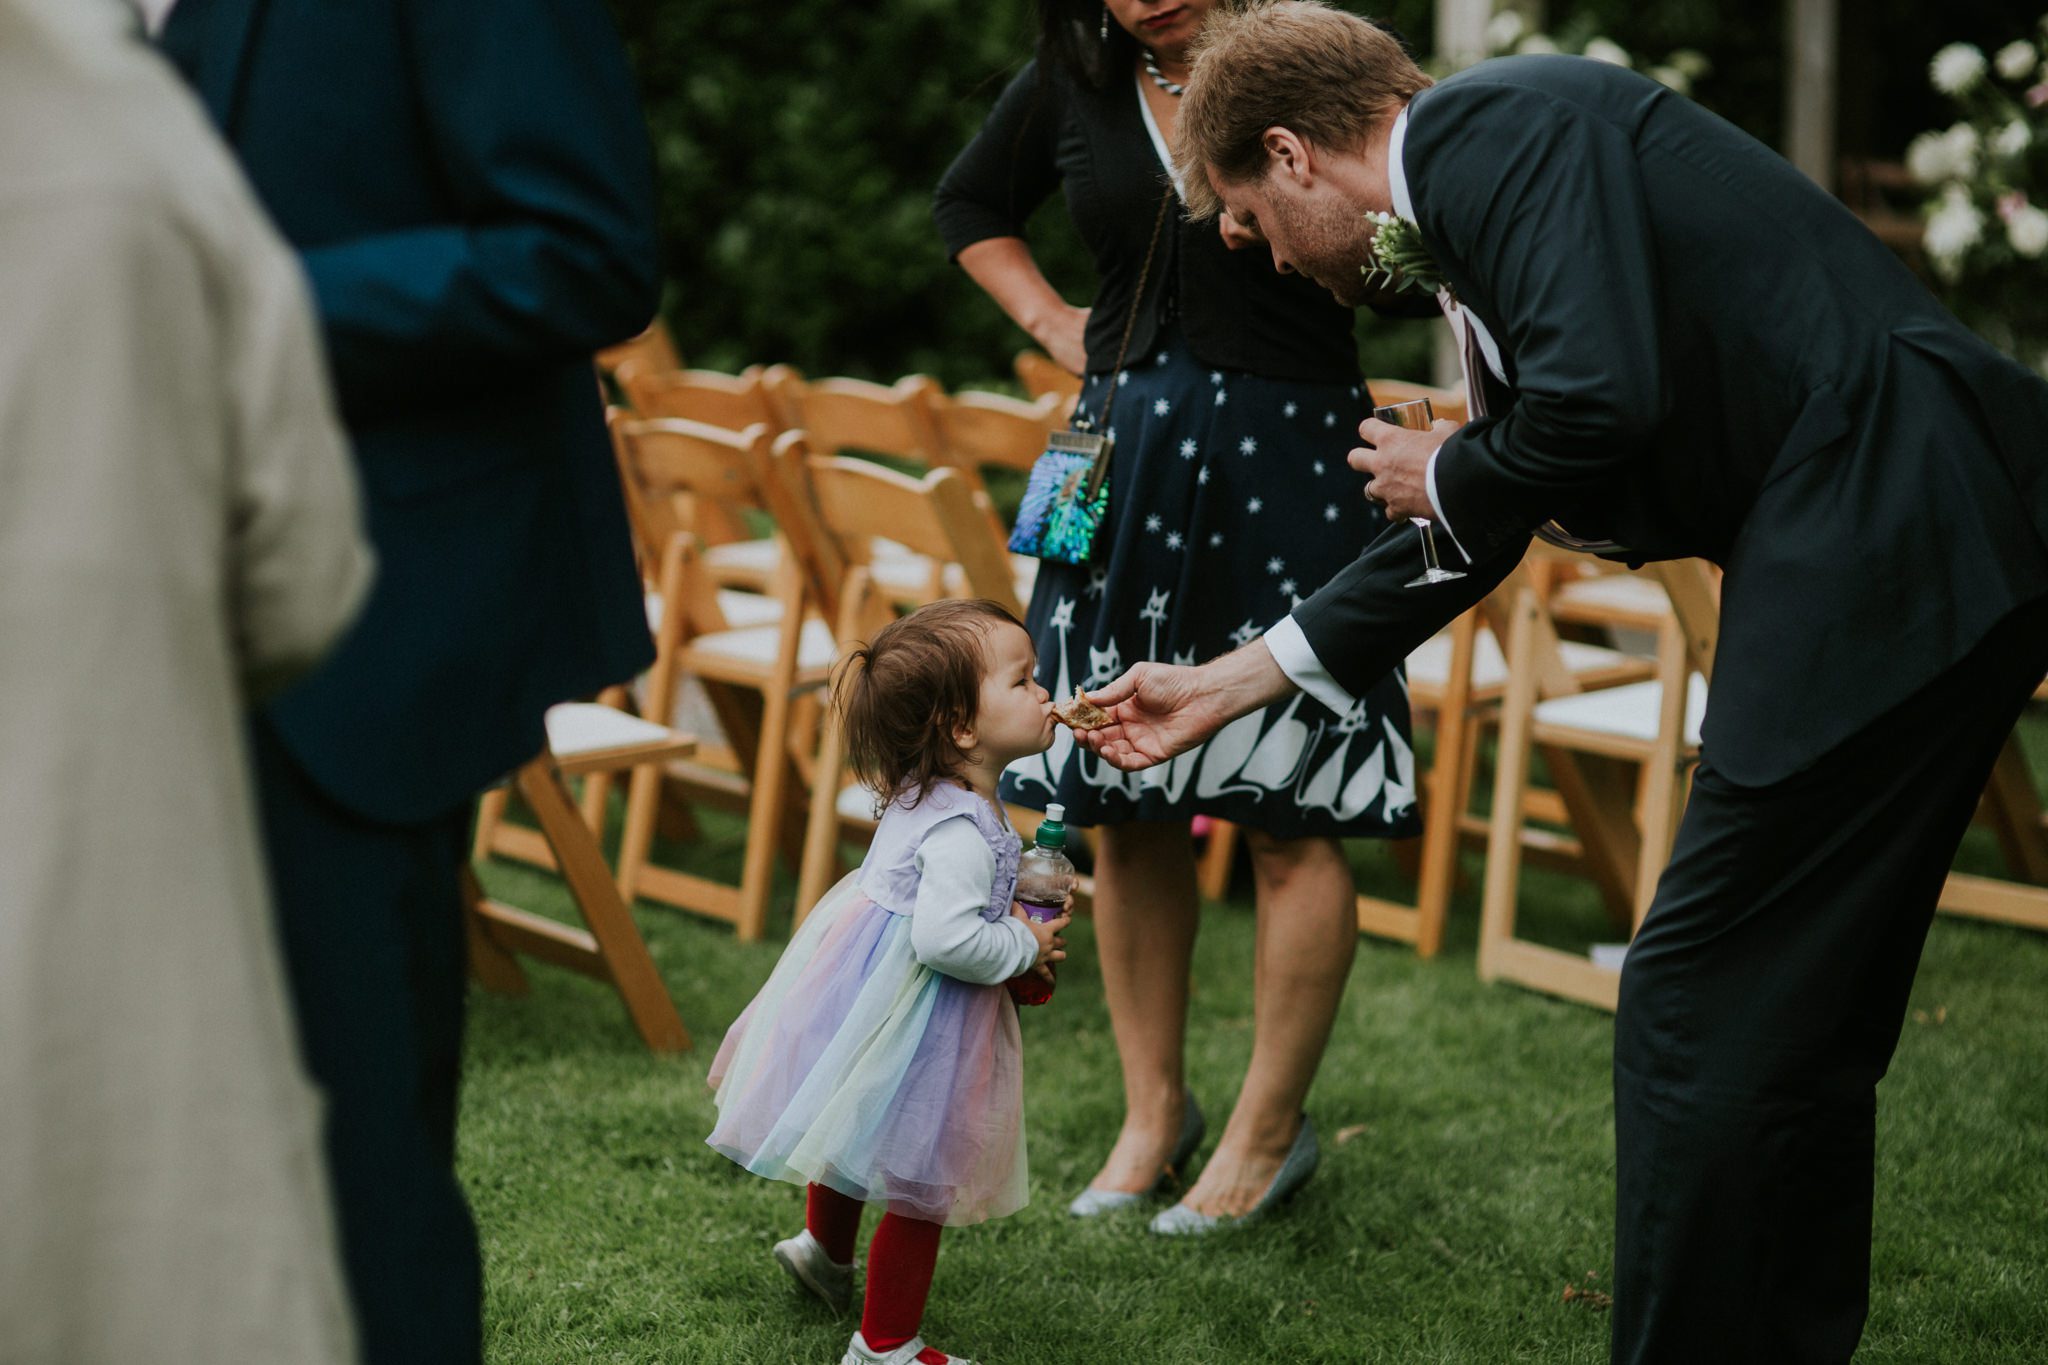 A young wedding guest is fed canapes after a wedding ceremony at Trevenna Barns in Cornwall